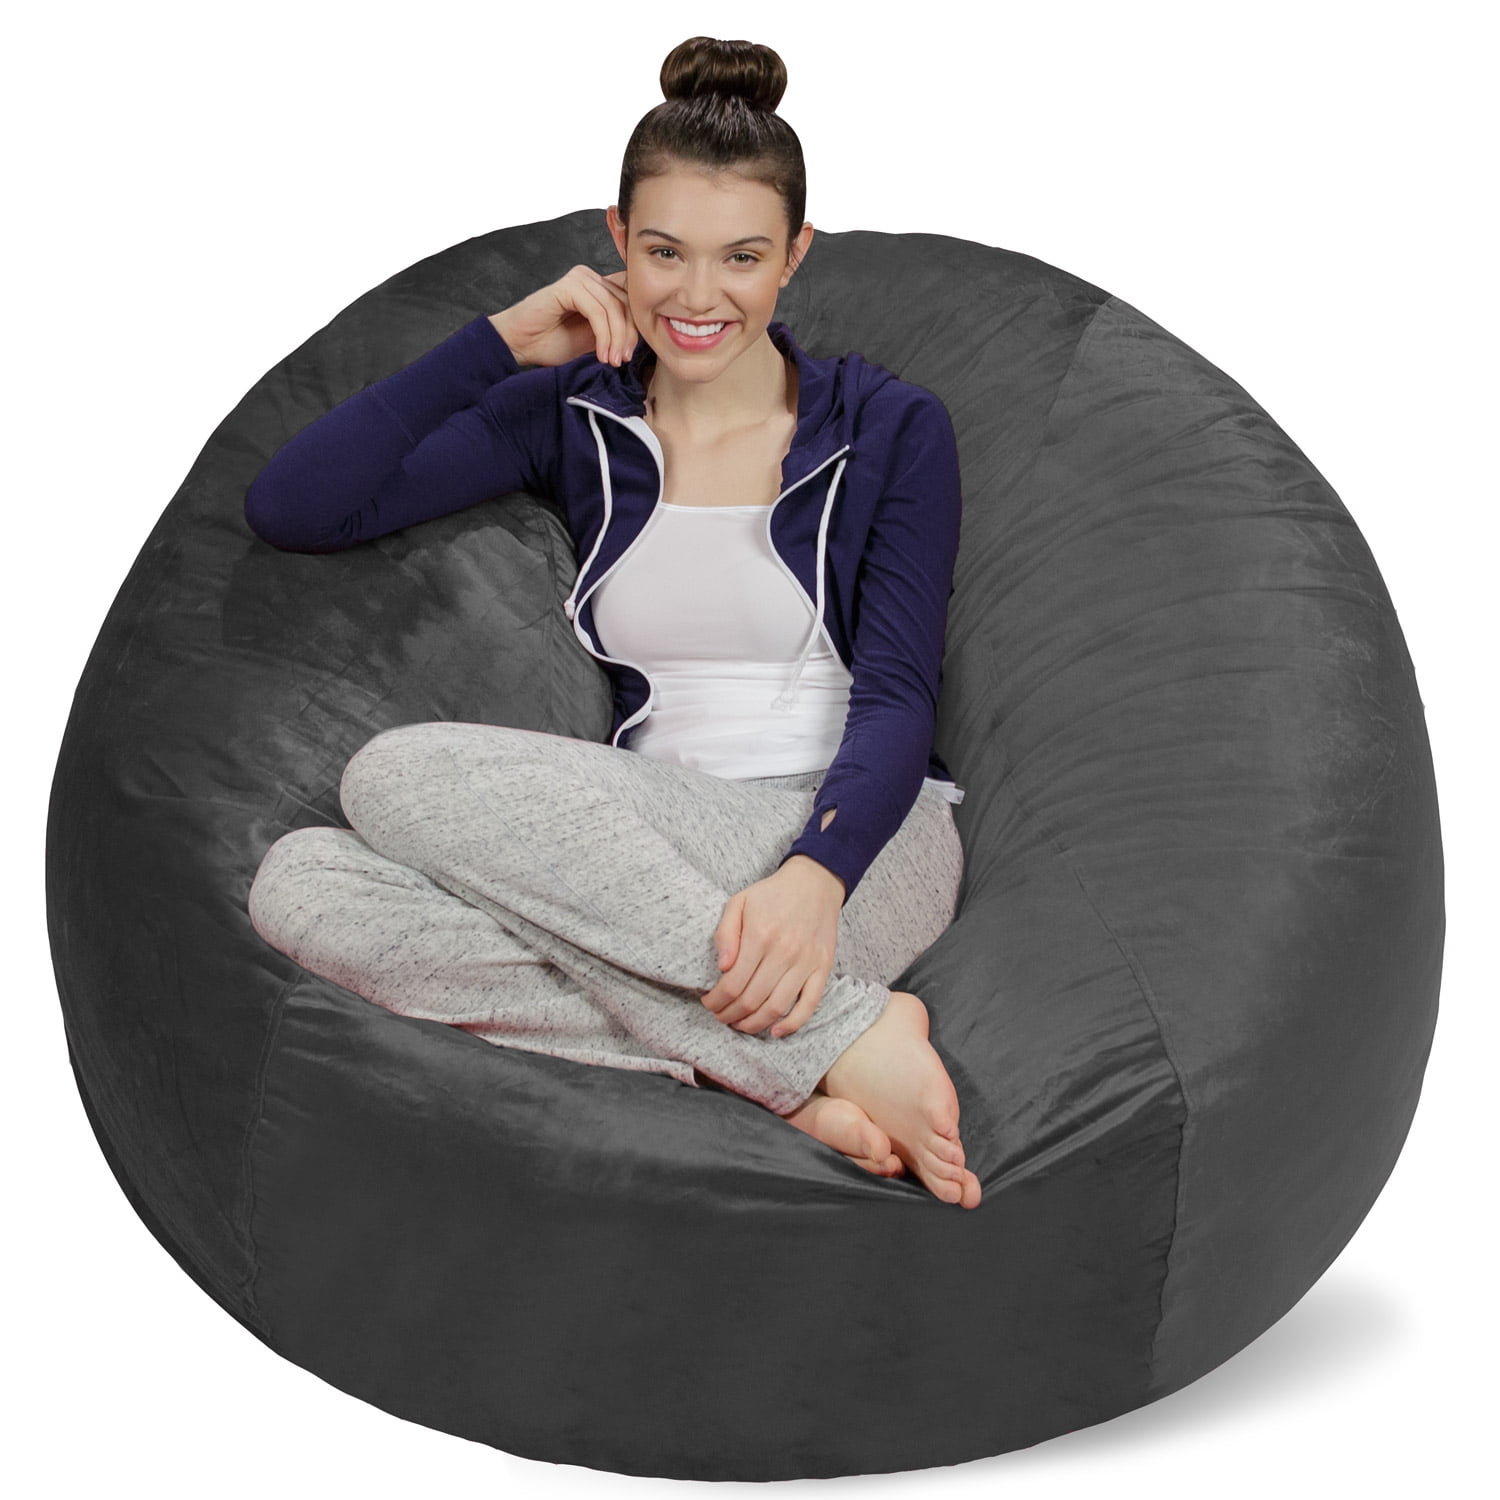 Unbranded White Bean Bags & Inflatable Furniture for sale